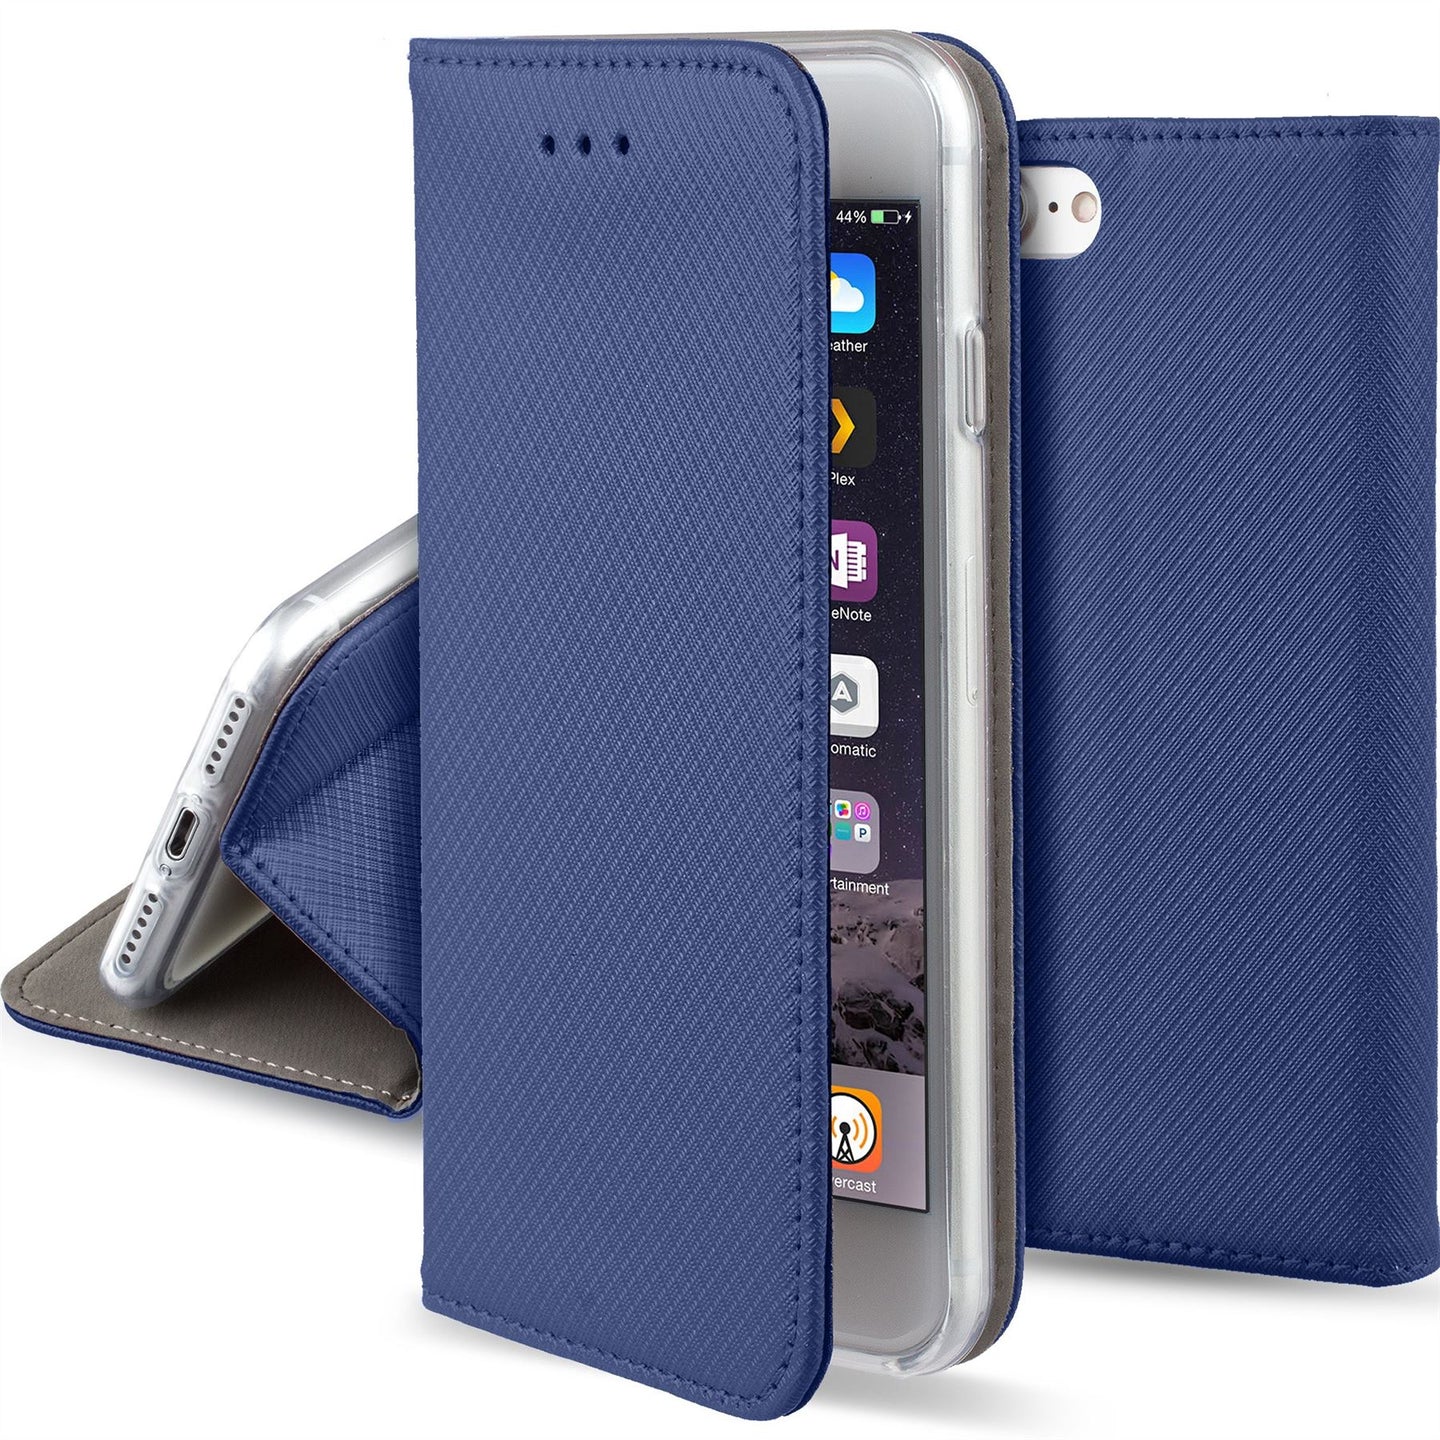 Moozy Case Flip Cover for iPhone SE, iPhone 5s, Dark Blue - Smart Magnetic Flip Case with Card Holder and Stand